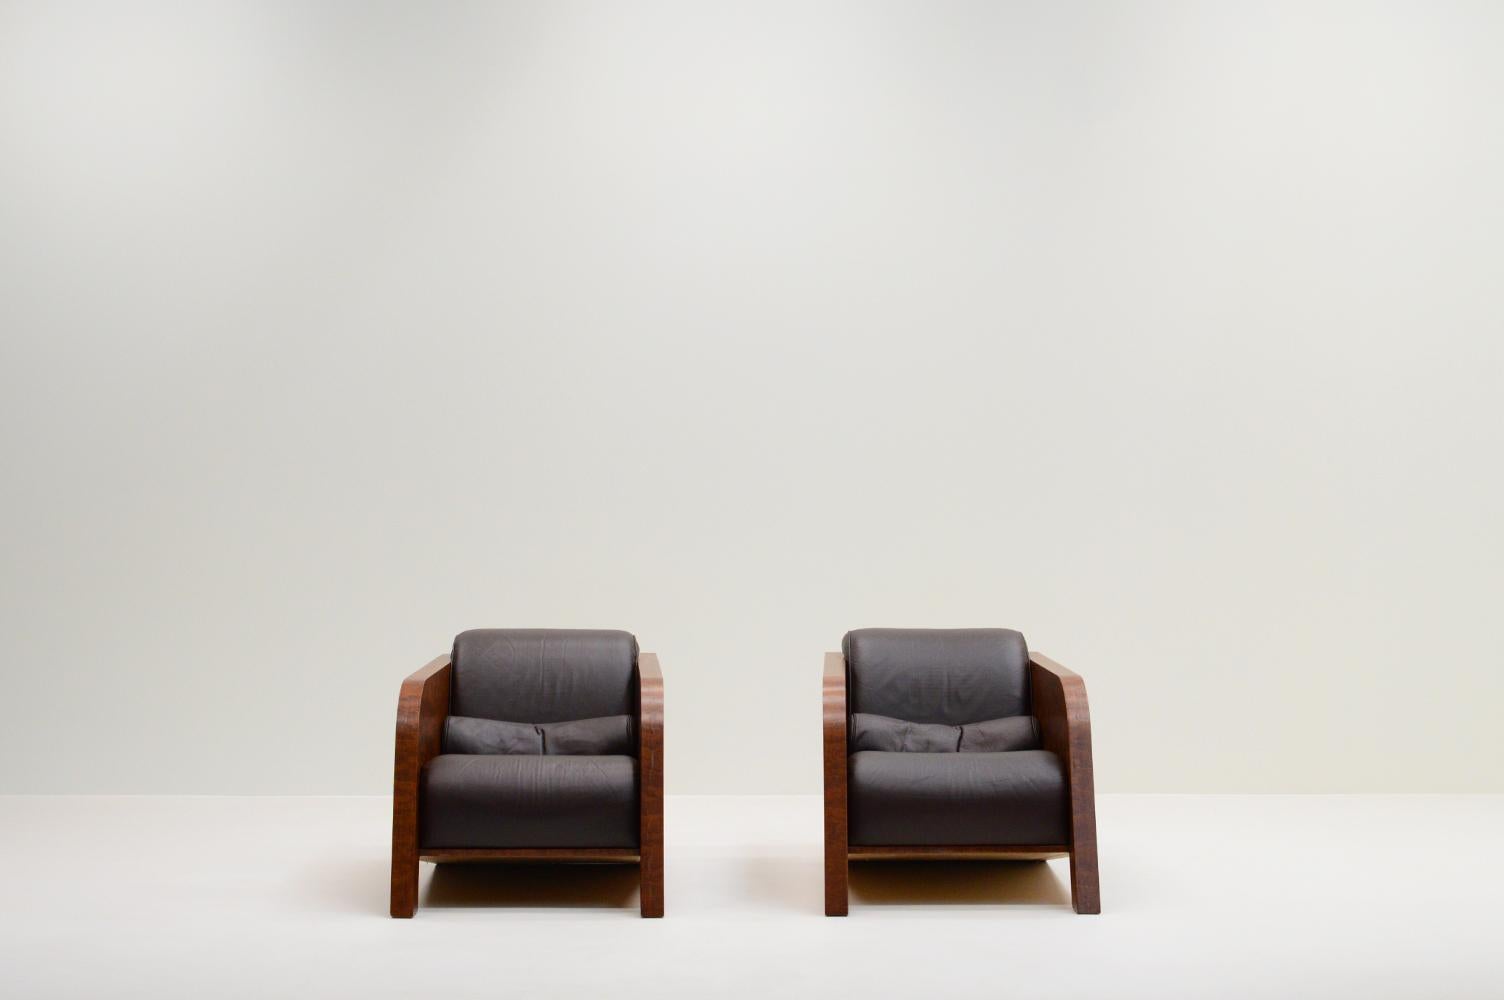 Post-Modern Set of 2 “Ypsilon” lounge chairs by Ulf Moritz, 1980s The Netherlands. For Sale